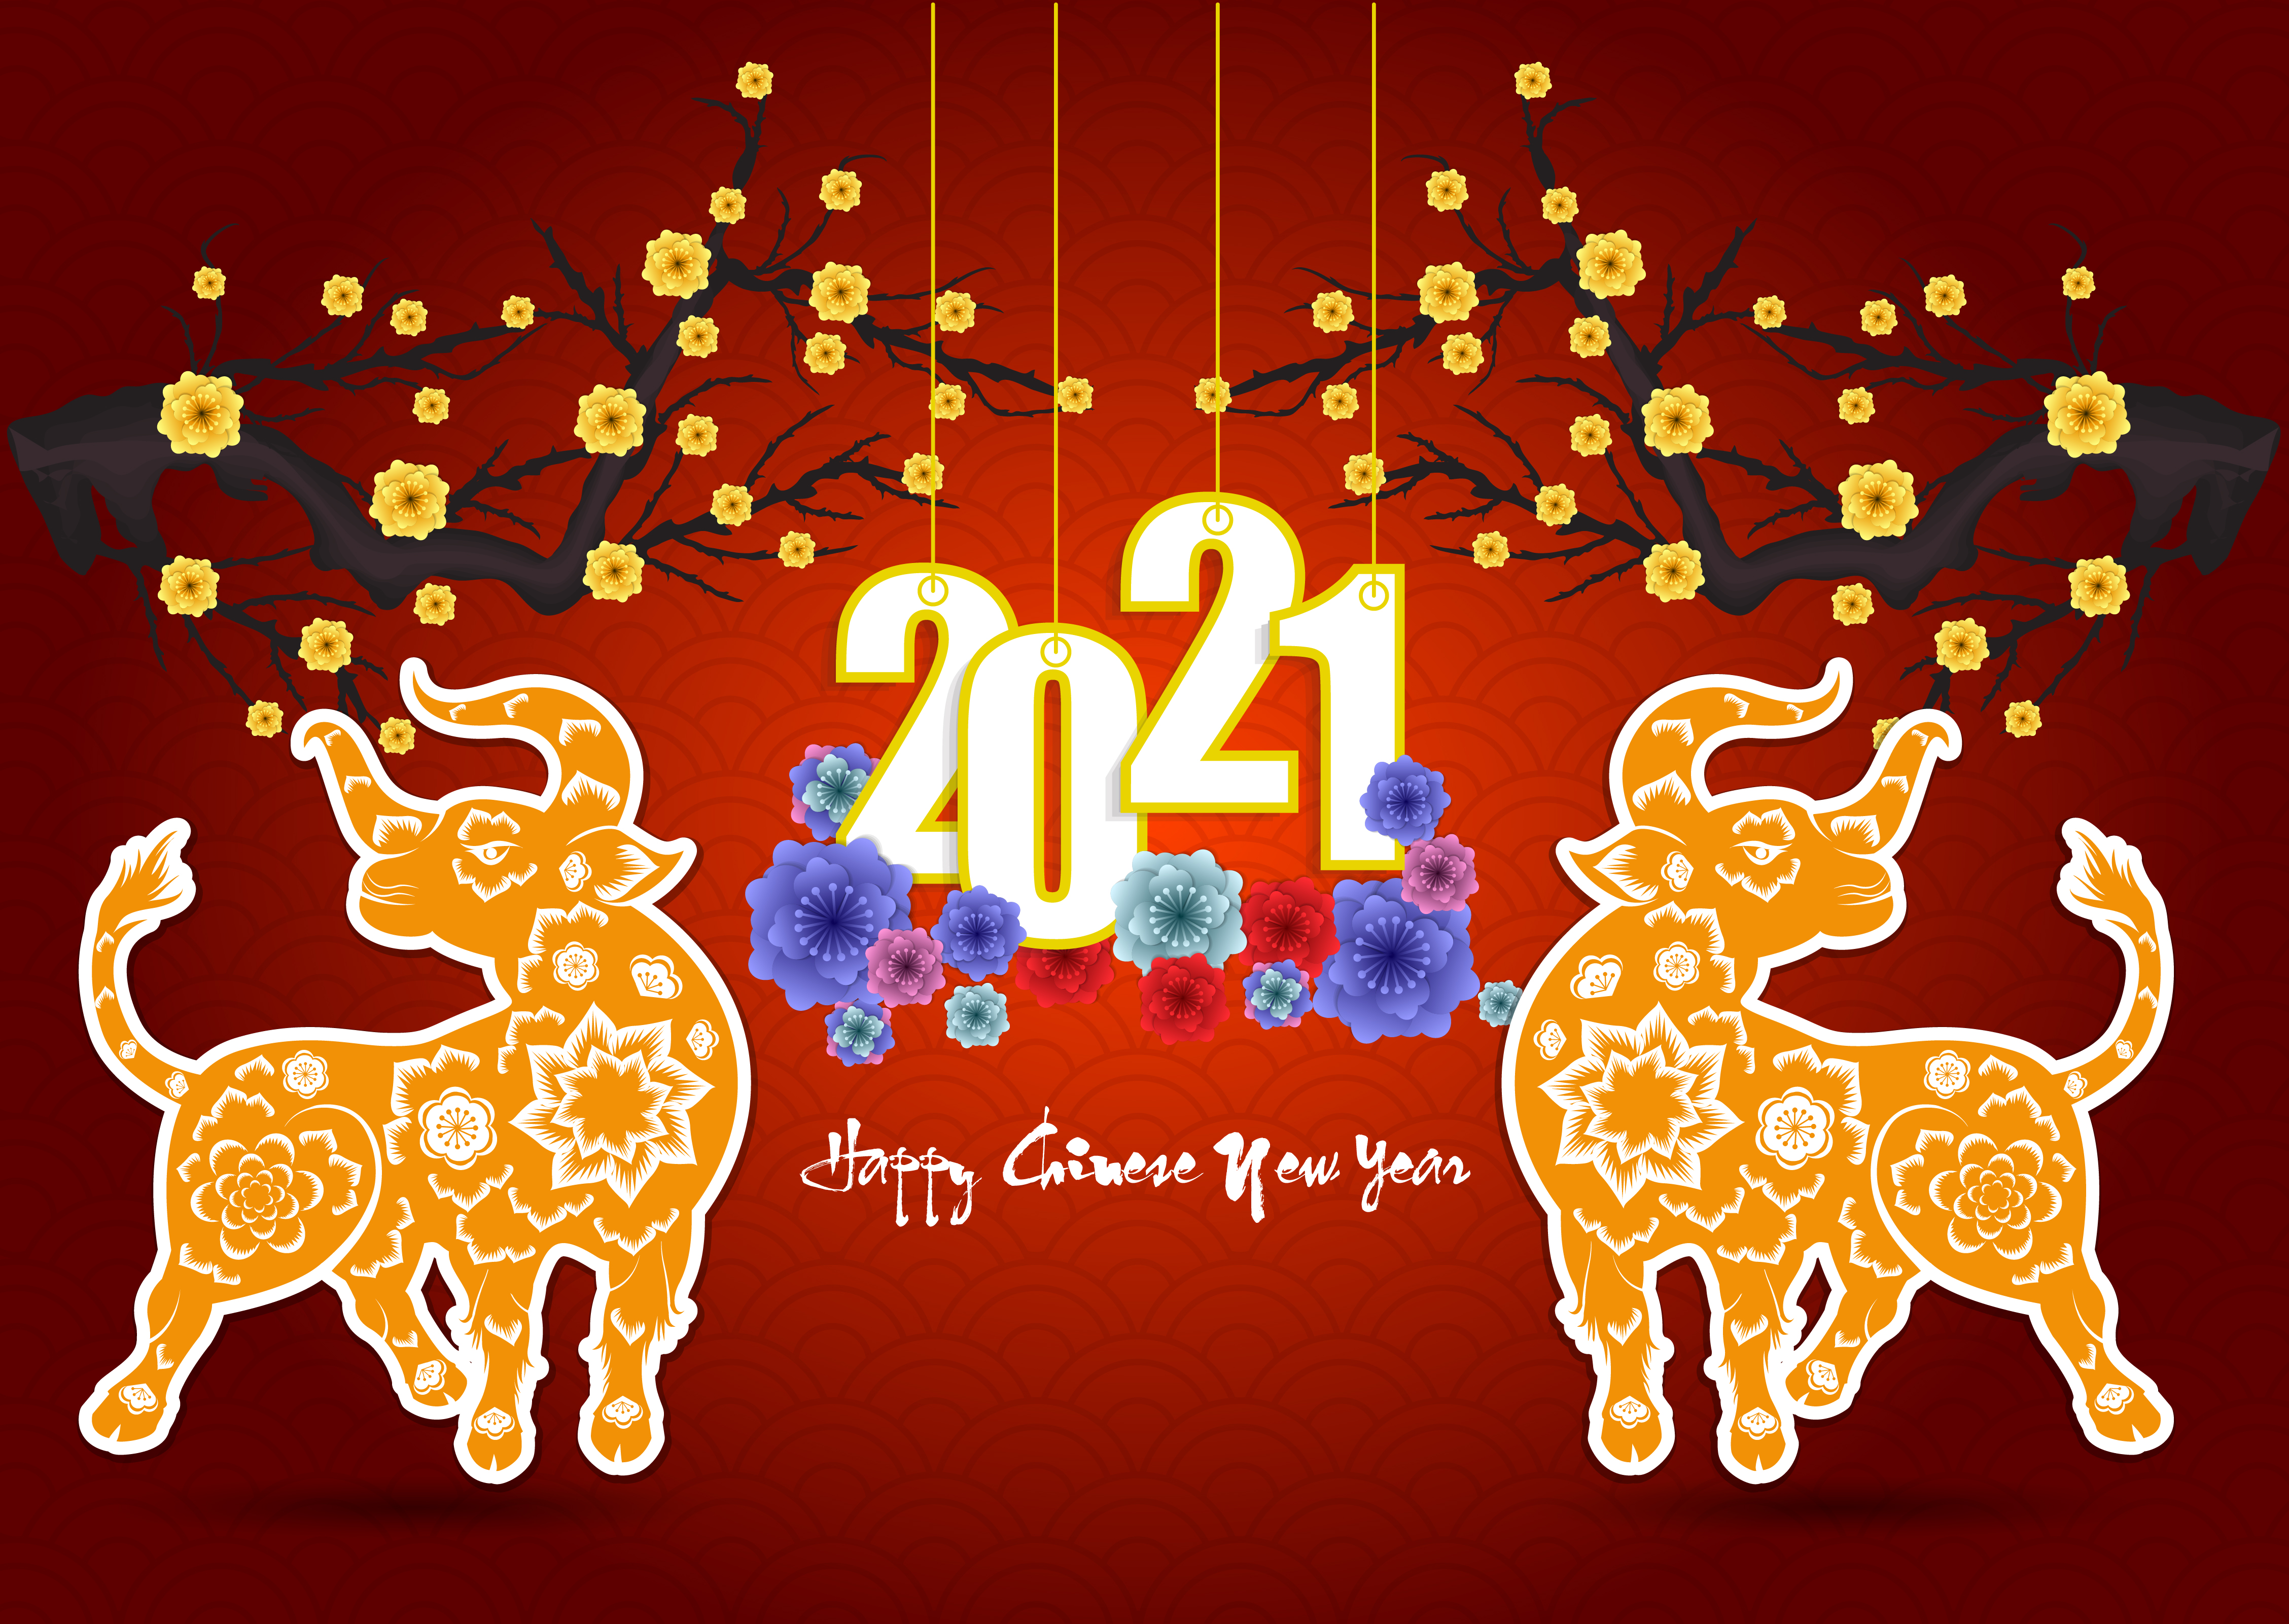 Wallpapers happy new year 2021 greeting 2021 on the desktop